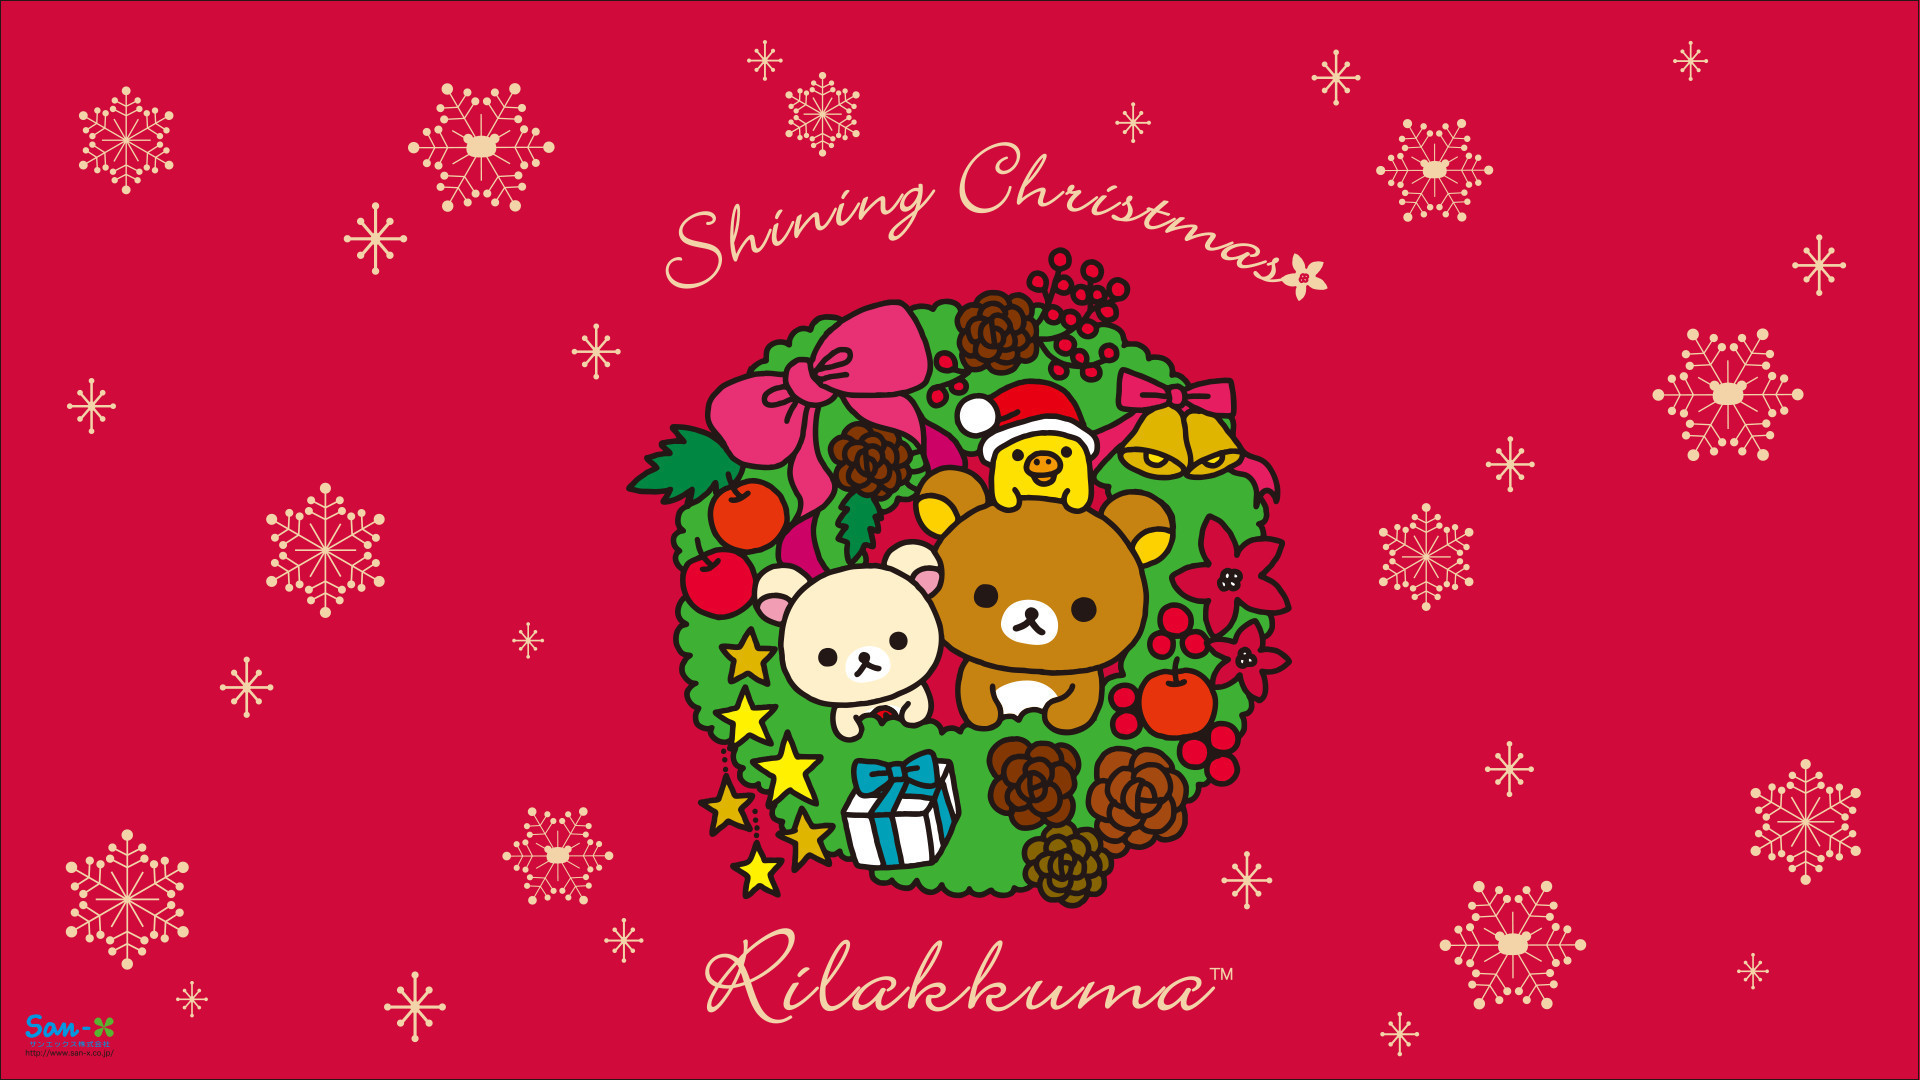 1920x1080 1080x1920 Hello Kitty Wallpaper, Wallpaper Backgrounds, Phone Wallpapers,  Christmas Holidays, Screen,